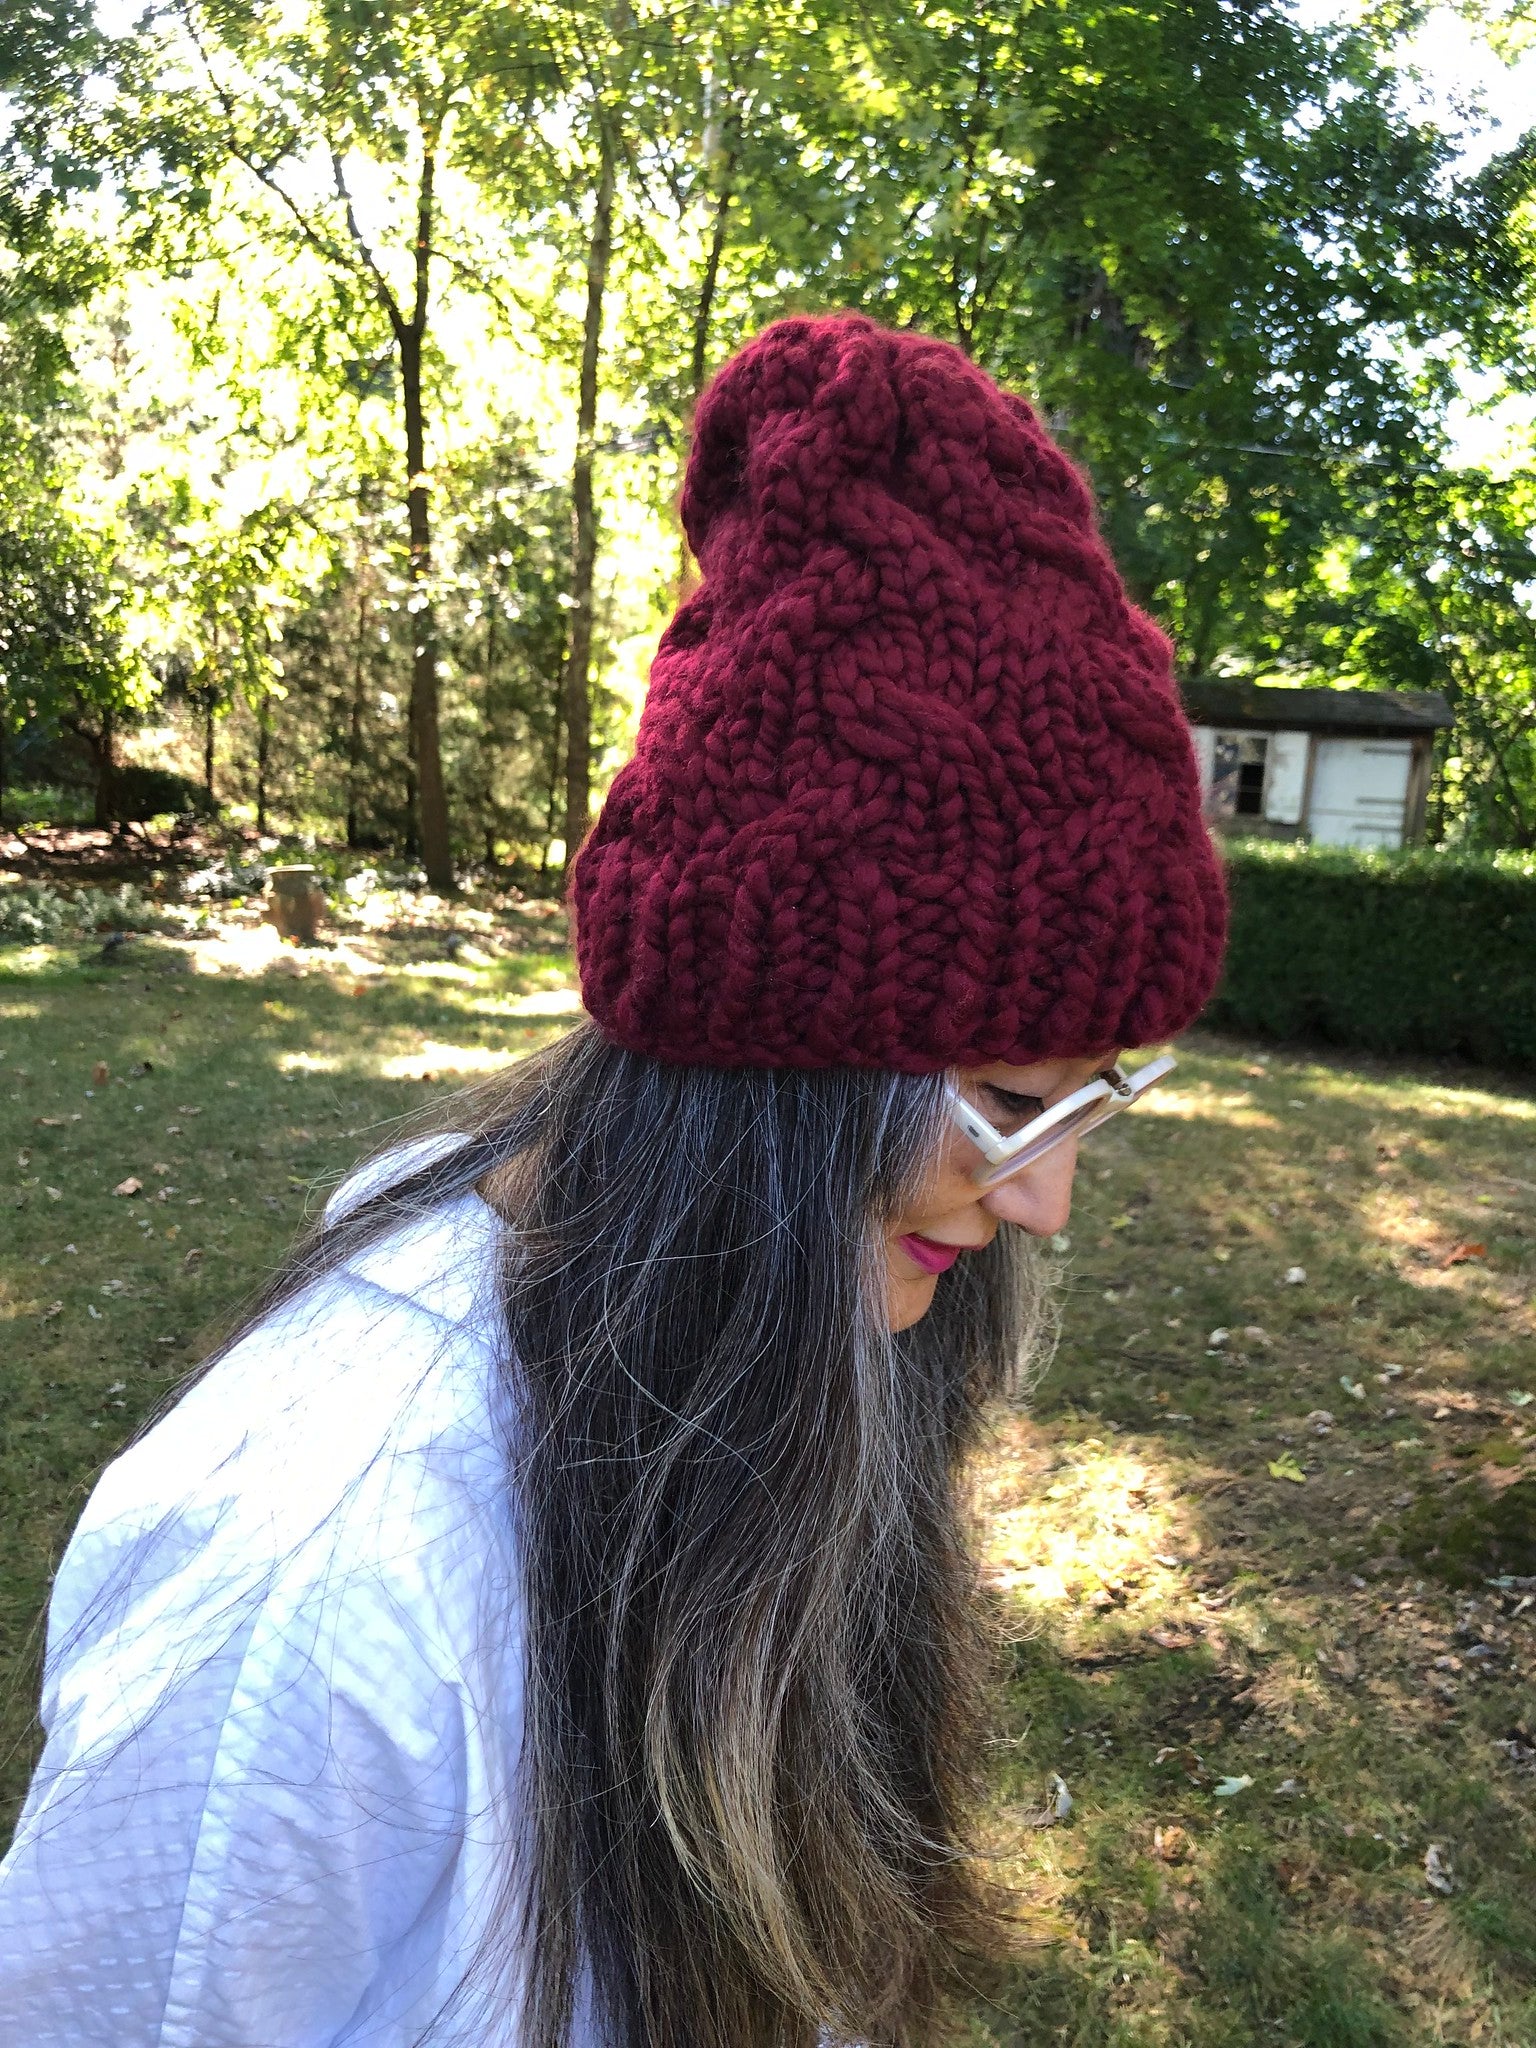 Knitting Tutorial: How to Knit a Wool Hat